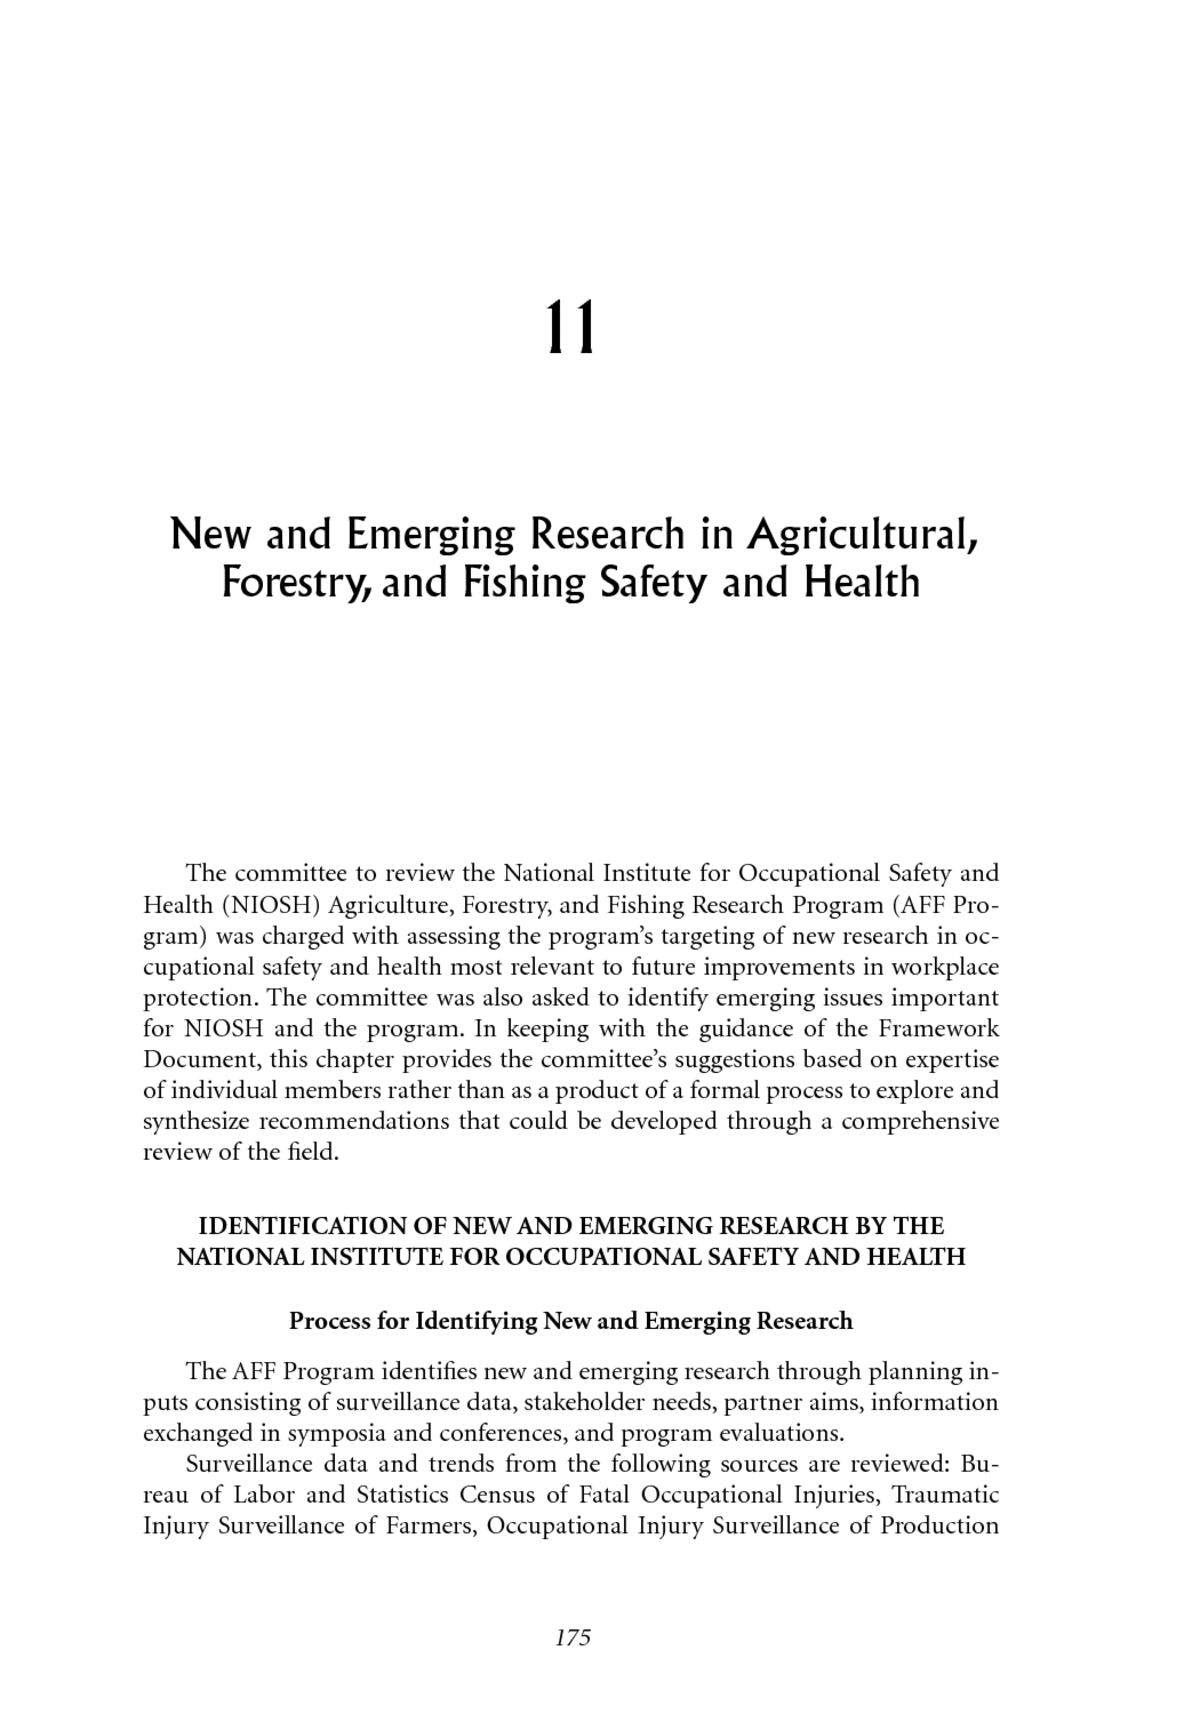 research title example in agriculture